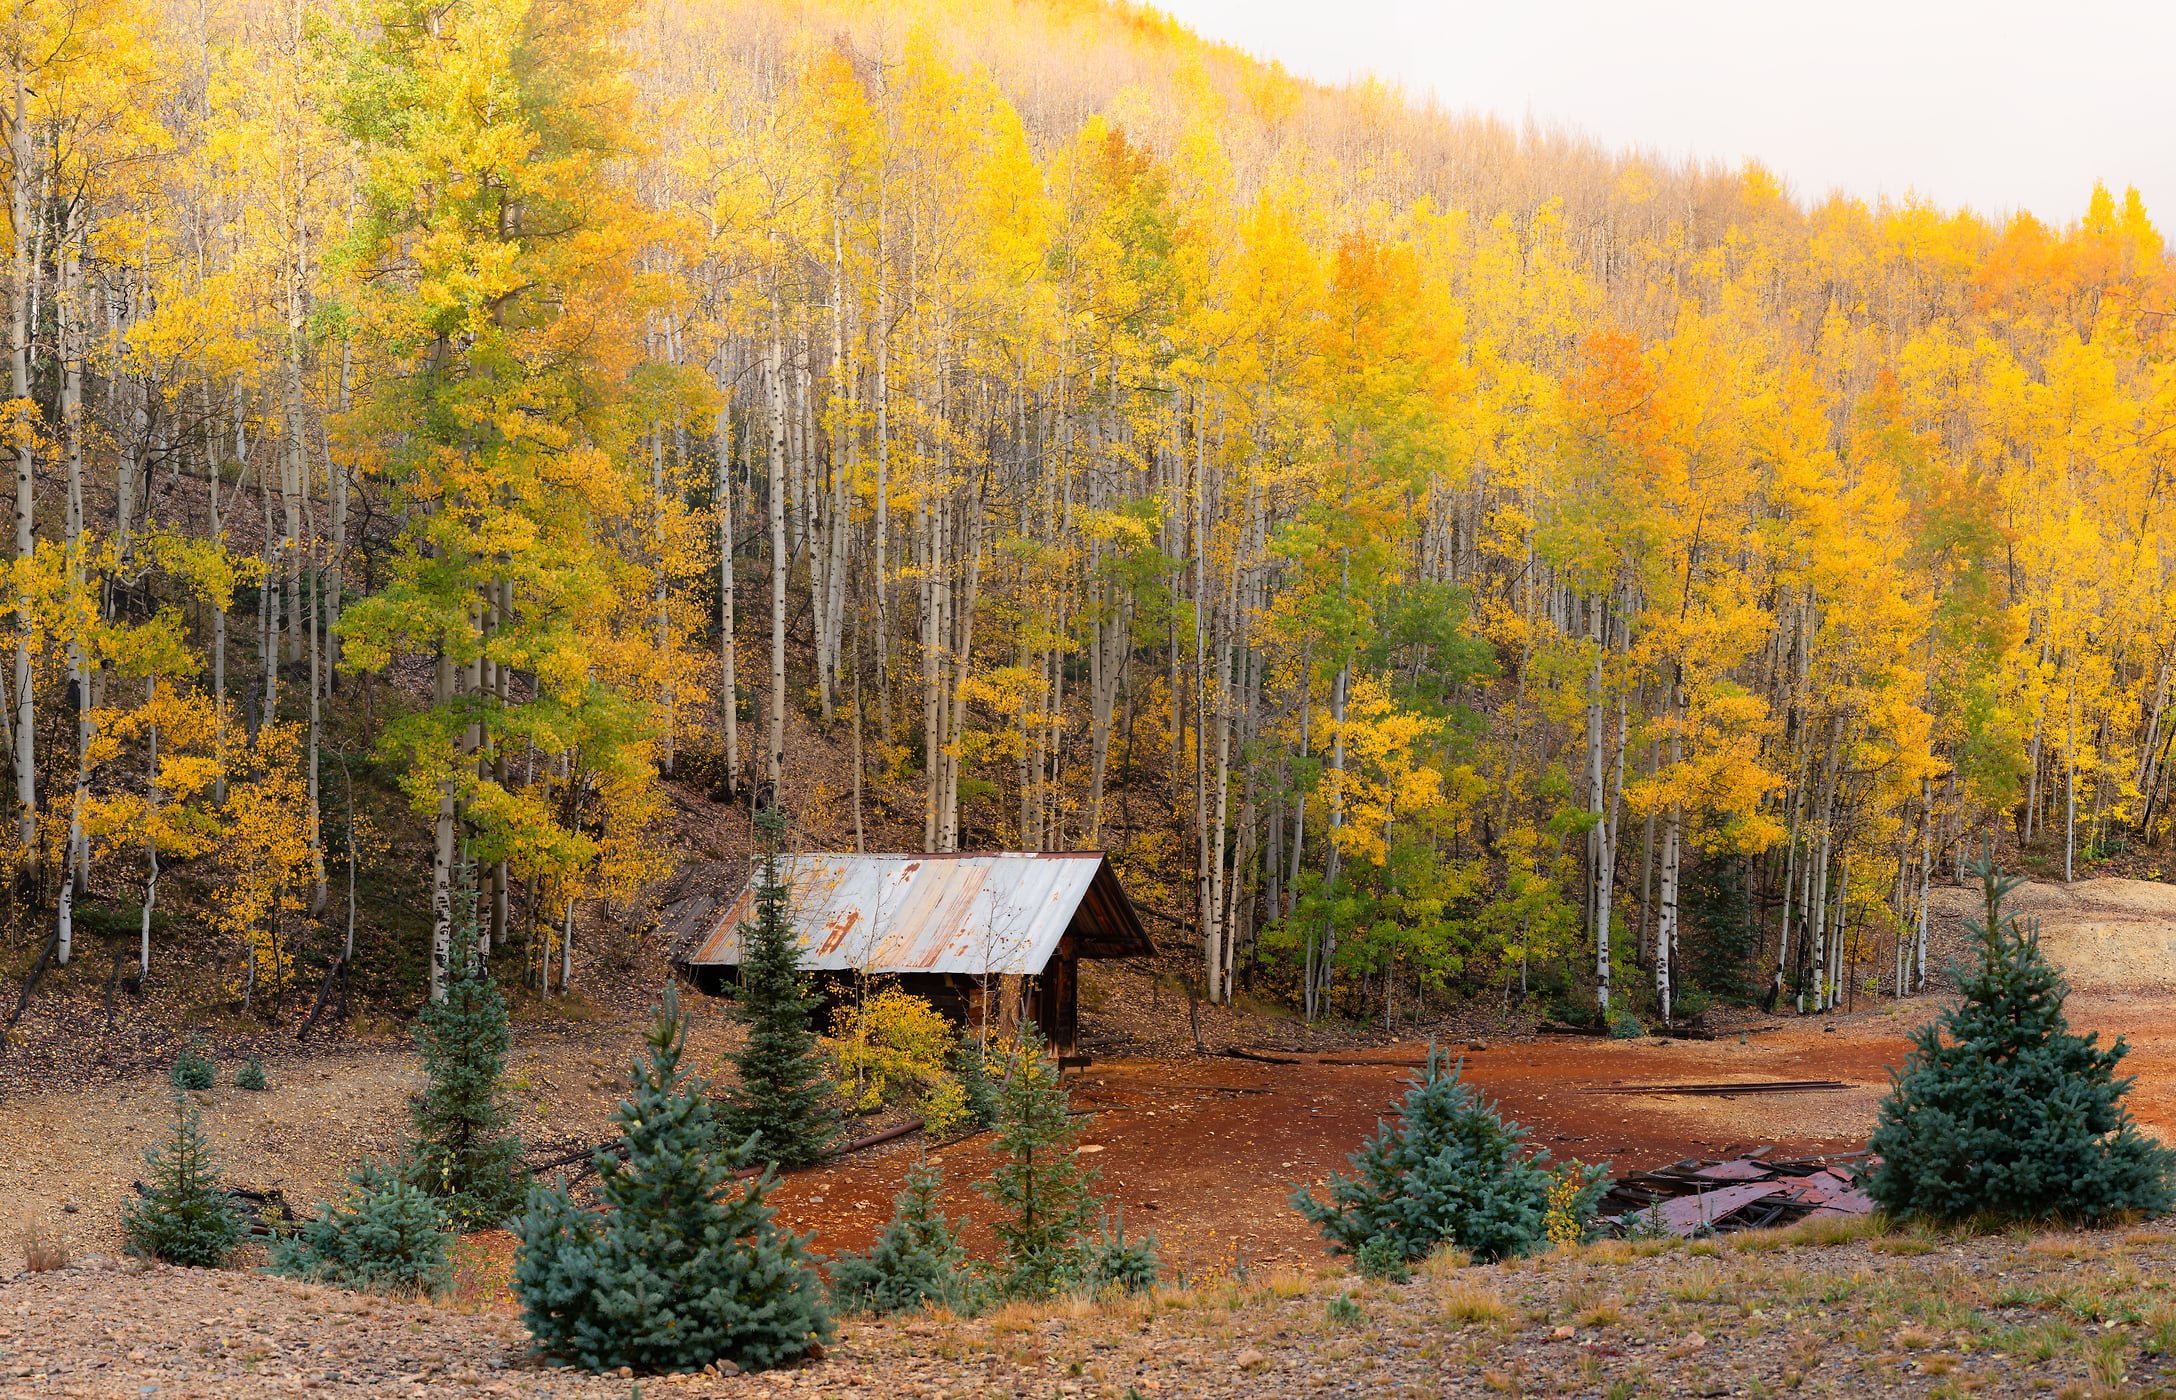 573 megapixels! A very high resolution, large-format VAST photo print of a Colorado mine in front of autumn foliage on aspen trees; photograph created by Phillip Noll in Ironton Park, Colorado.